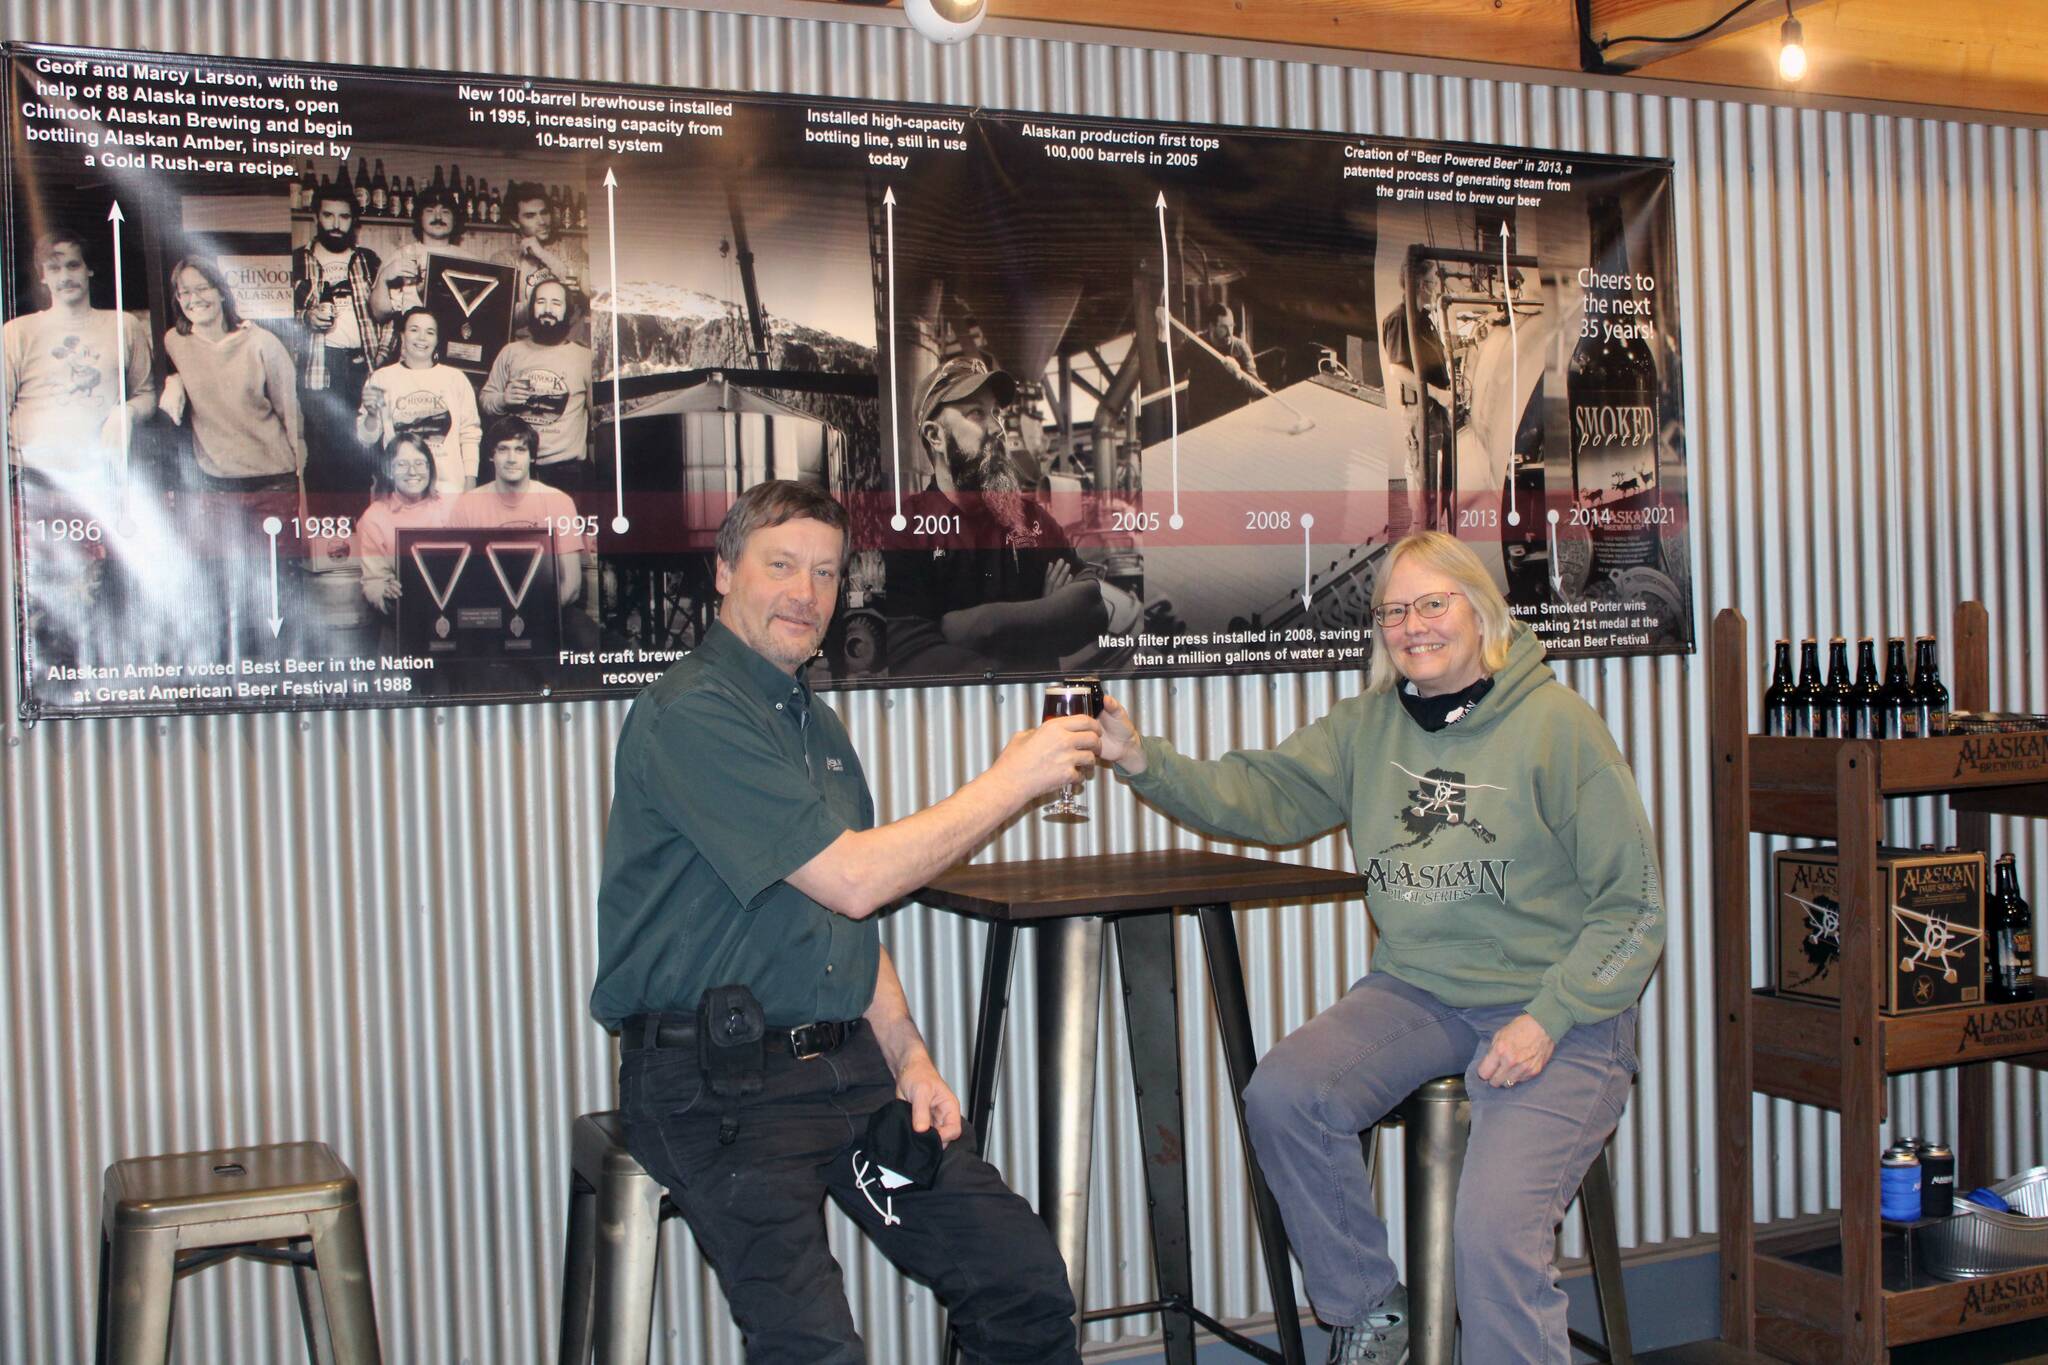 Geoff and Marcy Larson toast to 35 years of brewing in the Alaskan Brewing Co. Tap Room on Feb. 4. A timeline of business milestones hangs behind them. (Dana Zigmund/Juneau Empire)